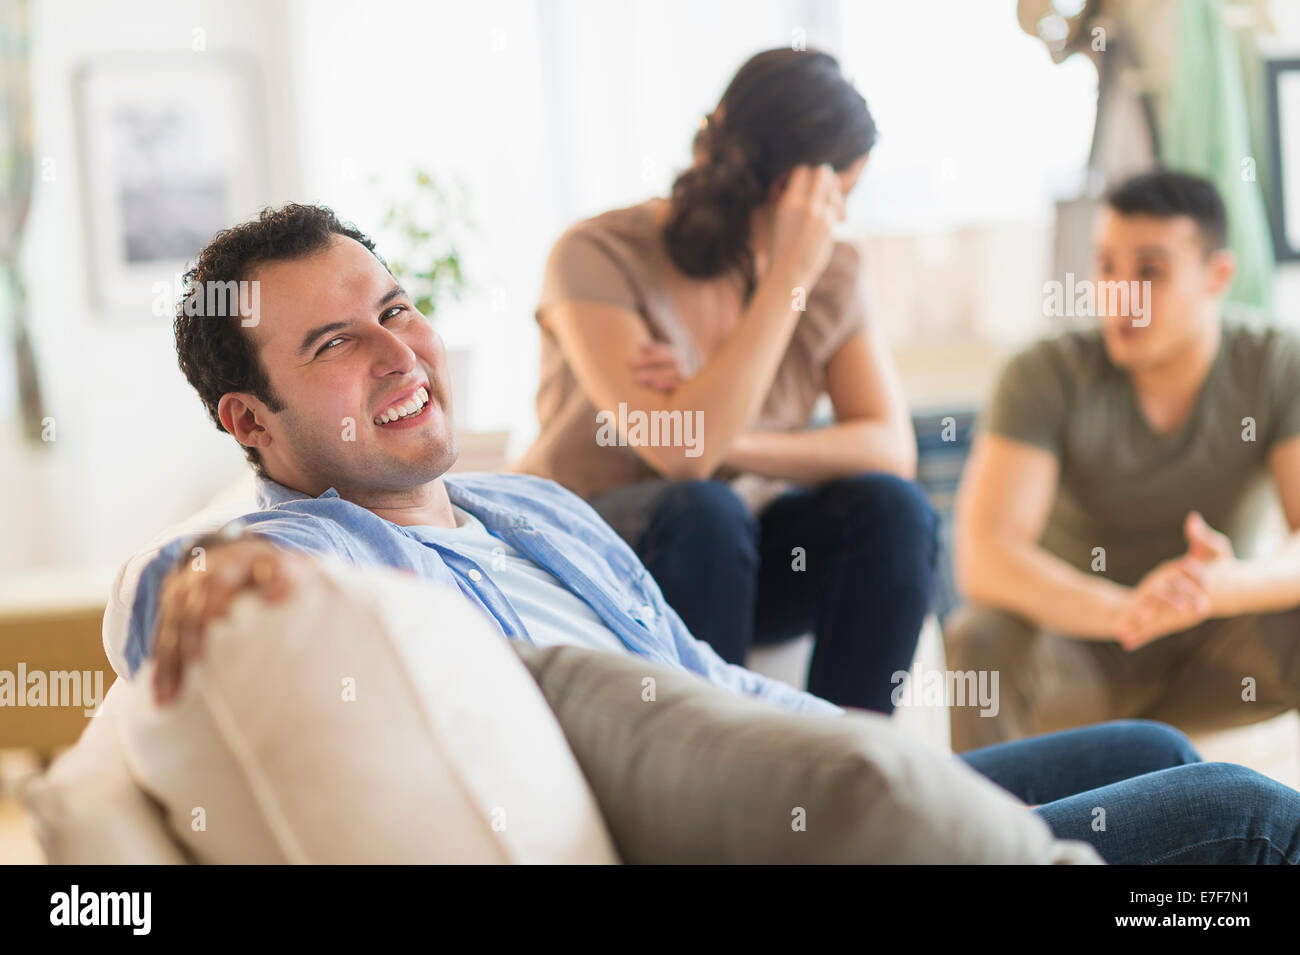 Man smiling on sofa Banque D'Images